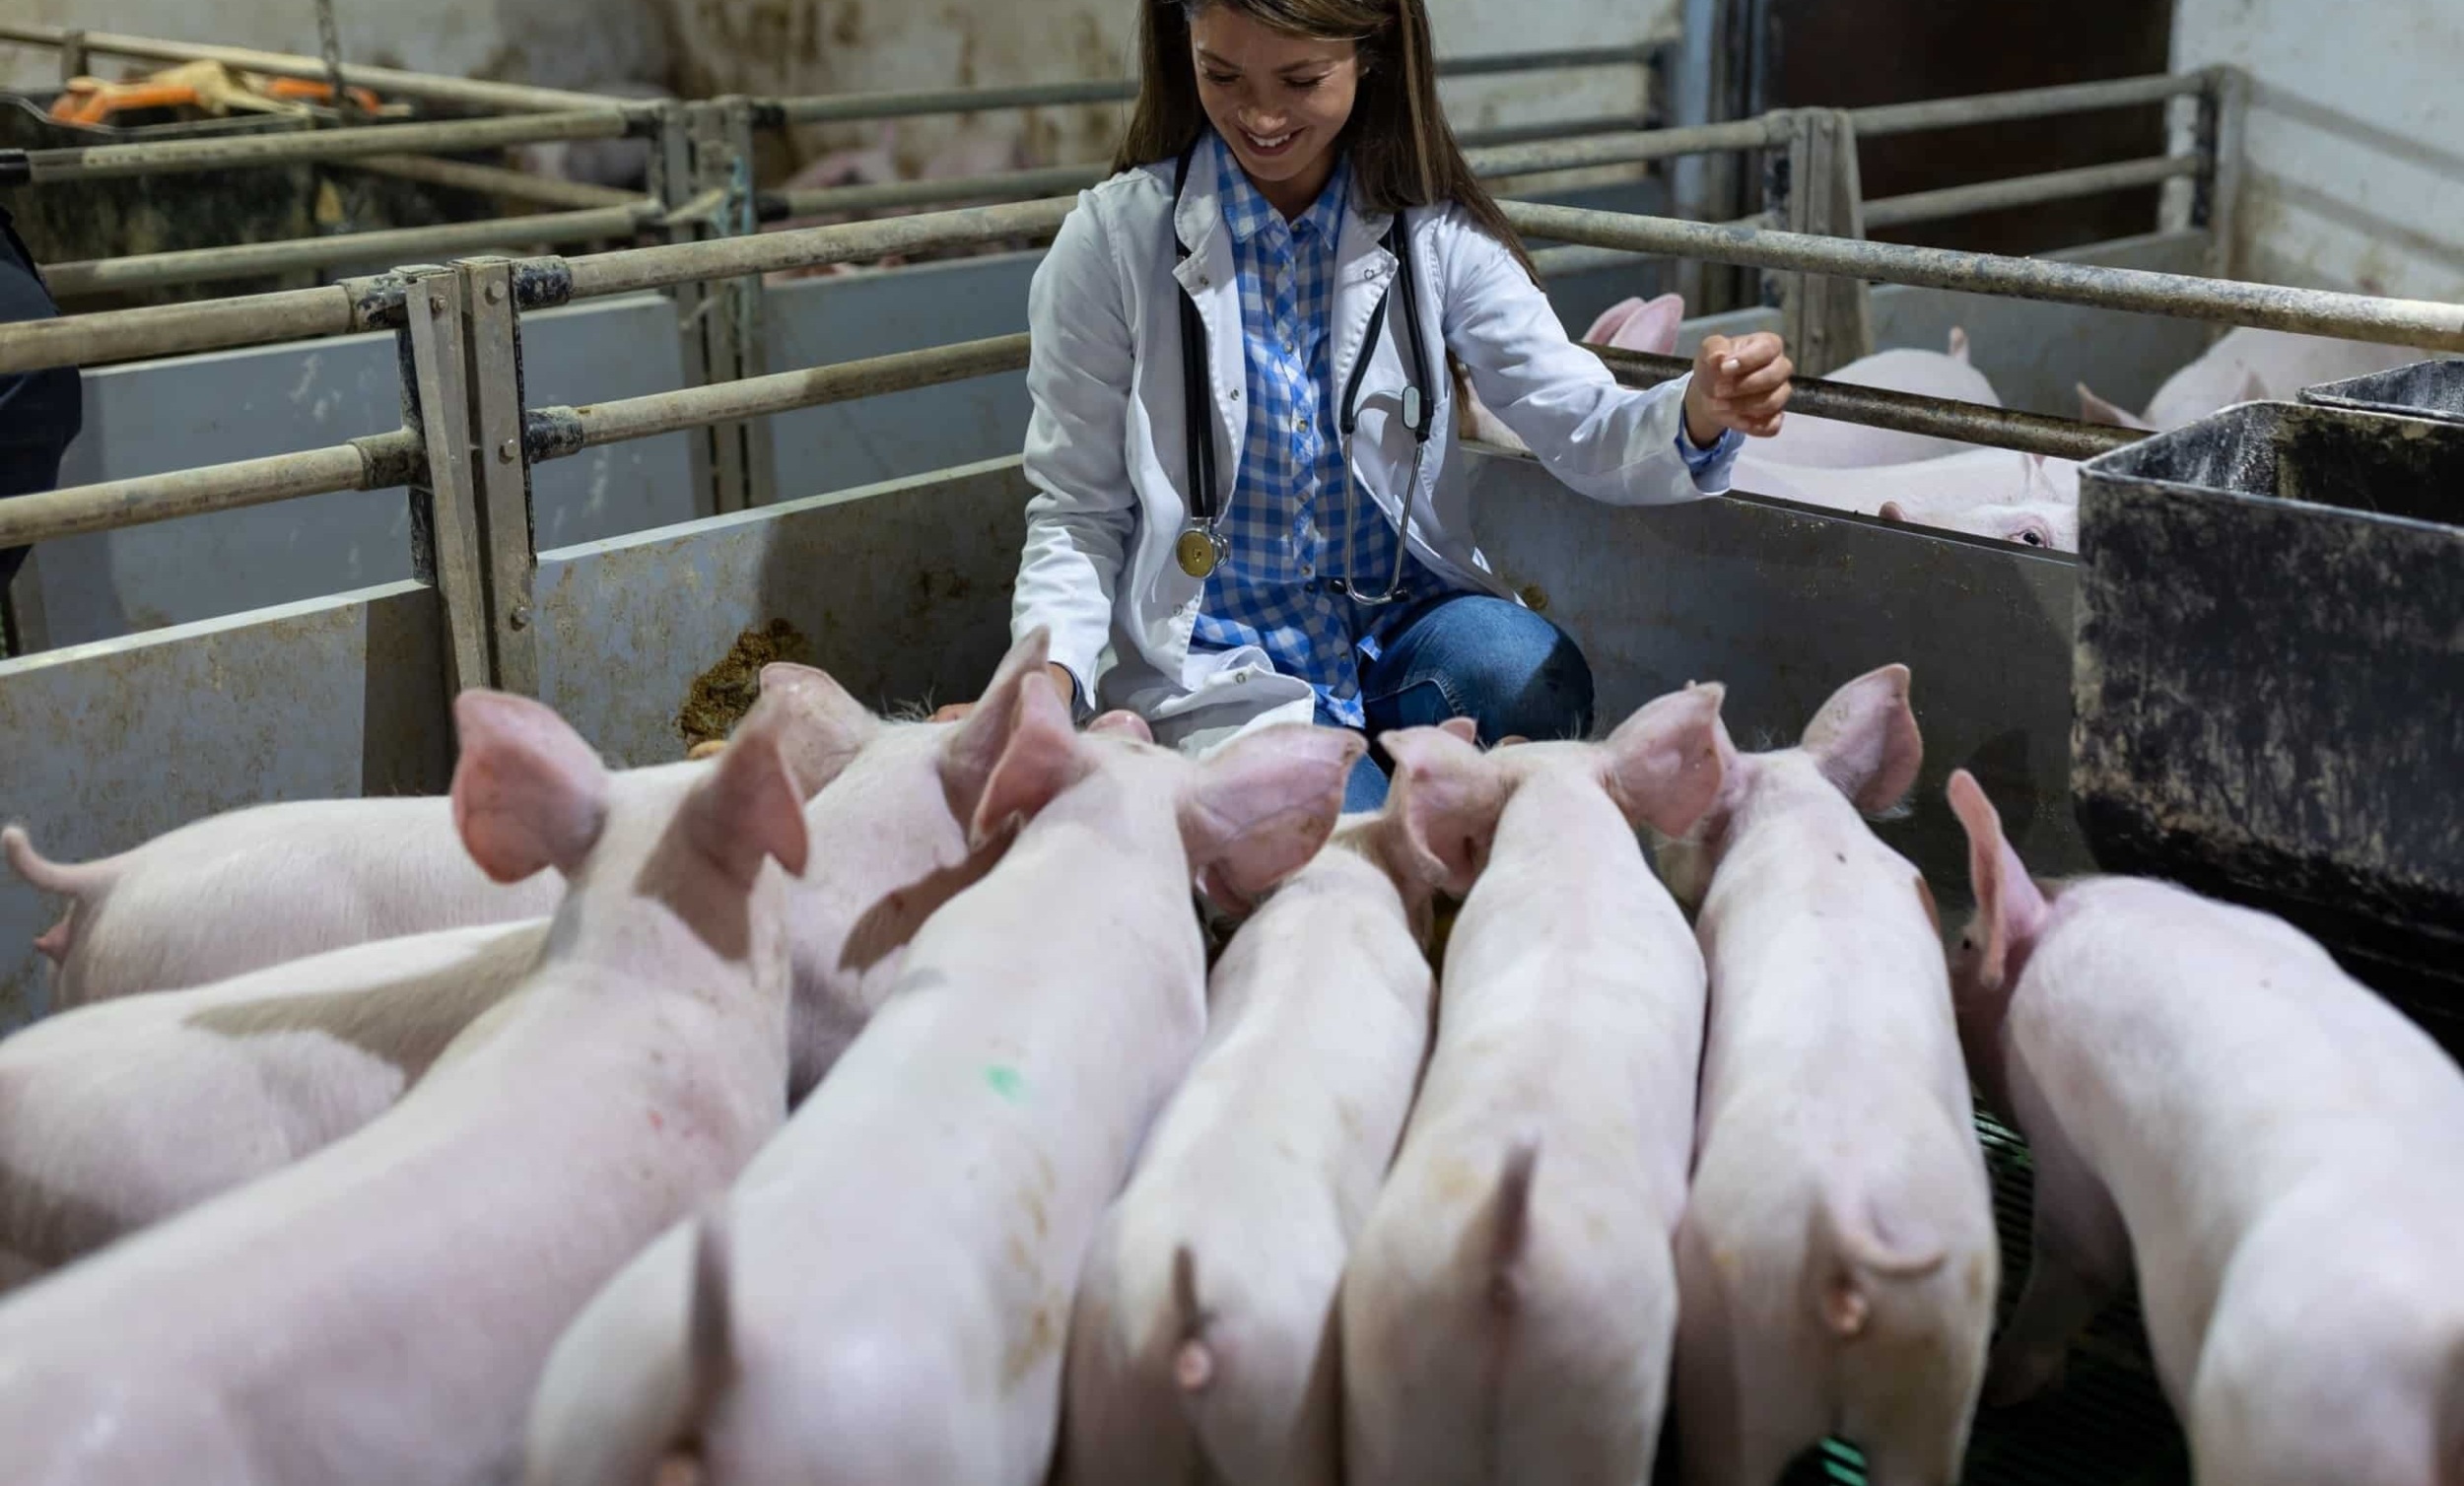 Young white female in lab coat and stethoscope around neck kneels down in indoor pig pen, surrounded by 8 young white pigs